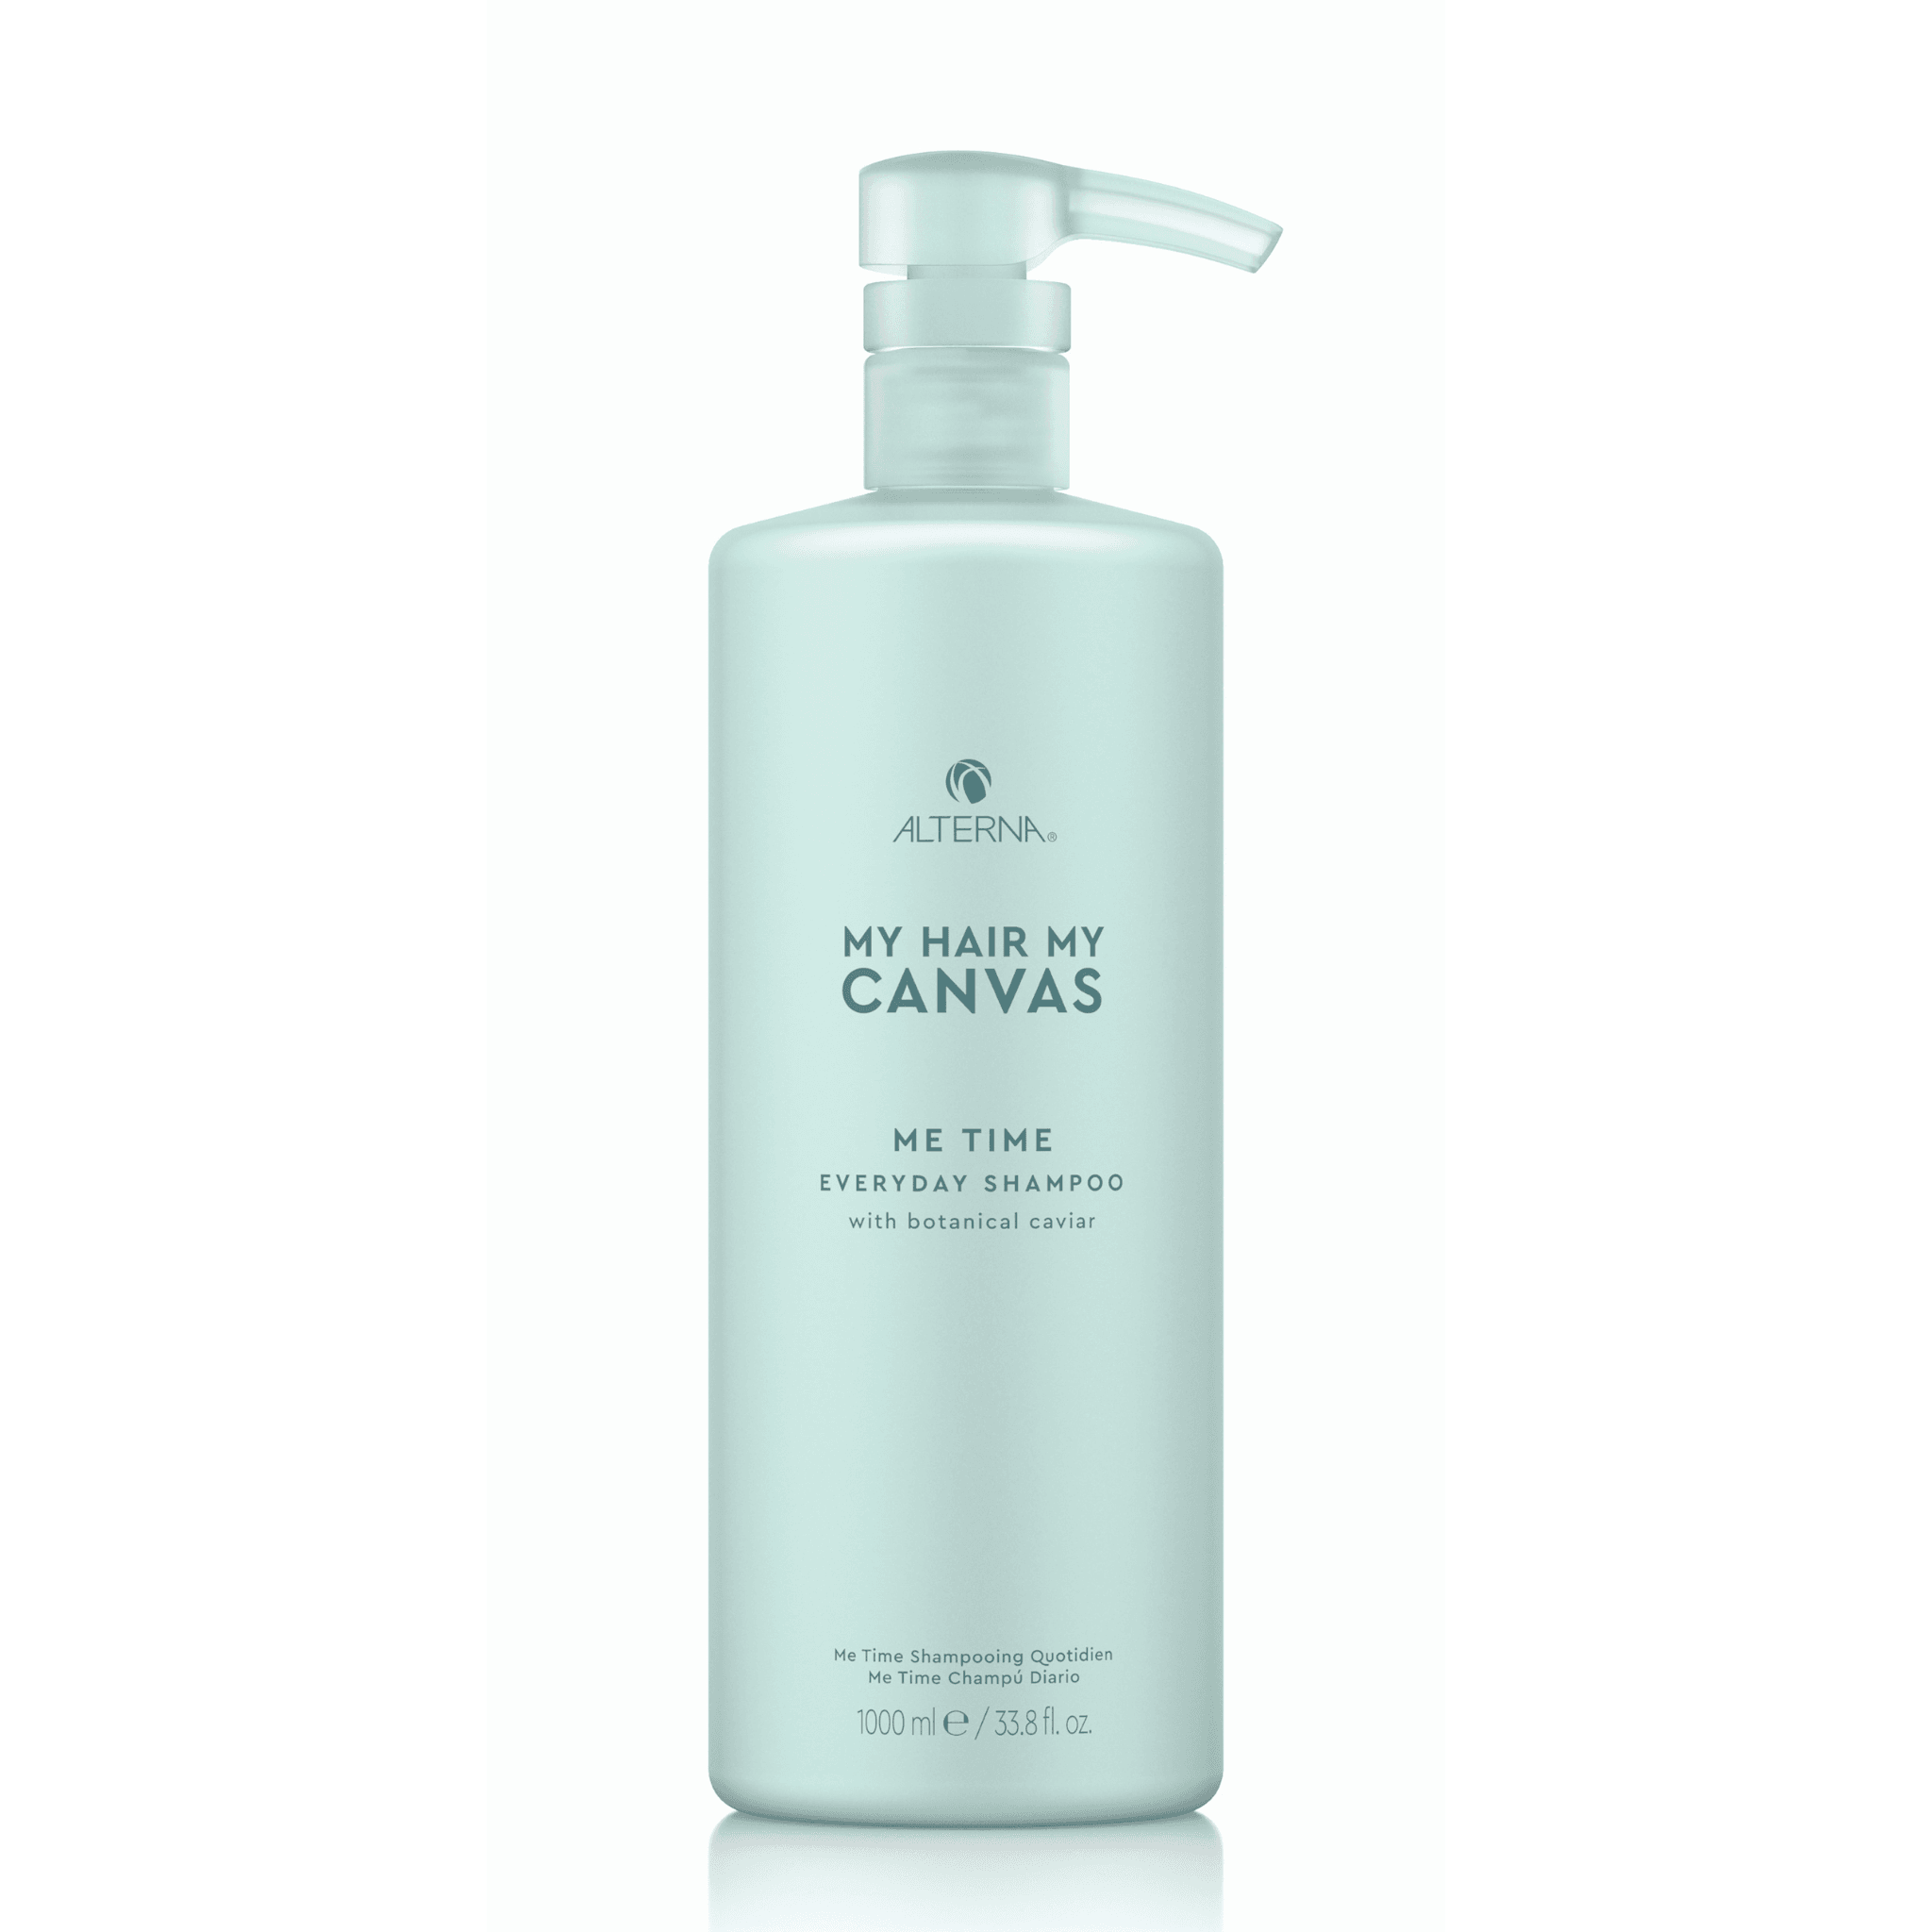 Alterna. My Hair My Canvas Shampoing Quotidien Me Time - 1000 ml - Concept C. Shop